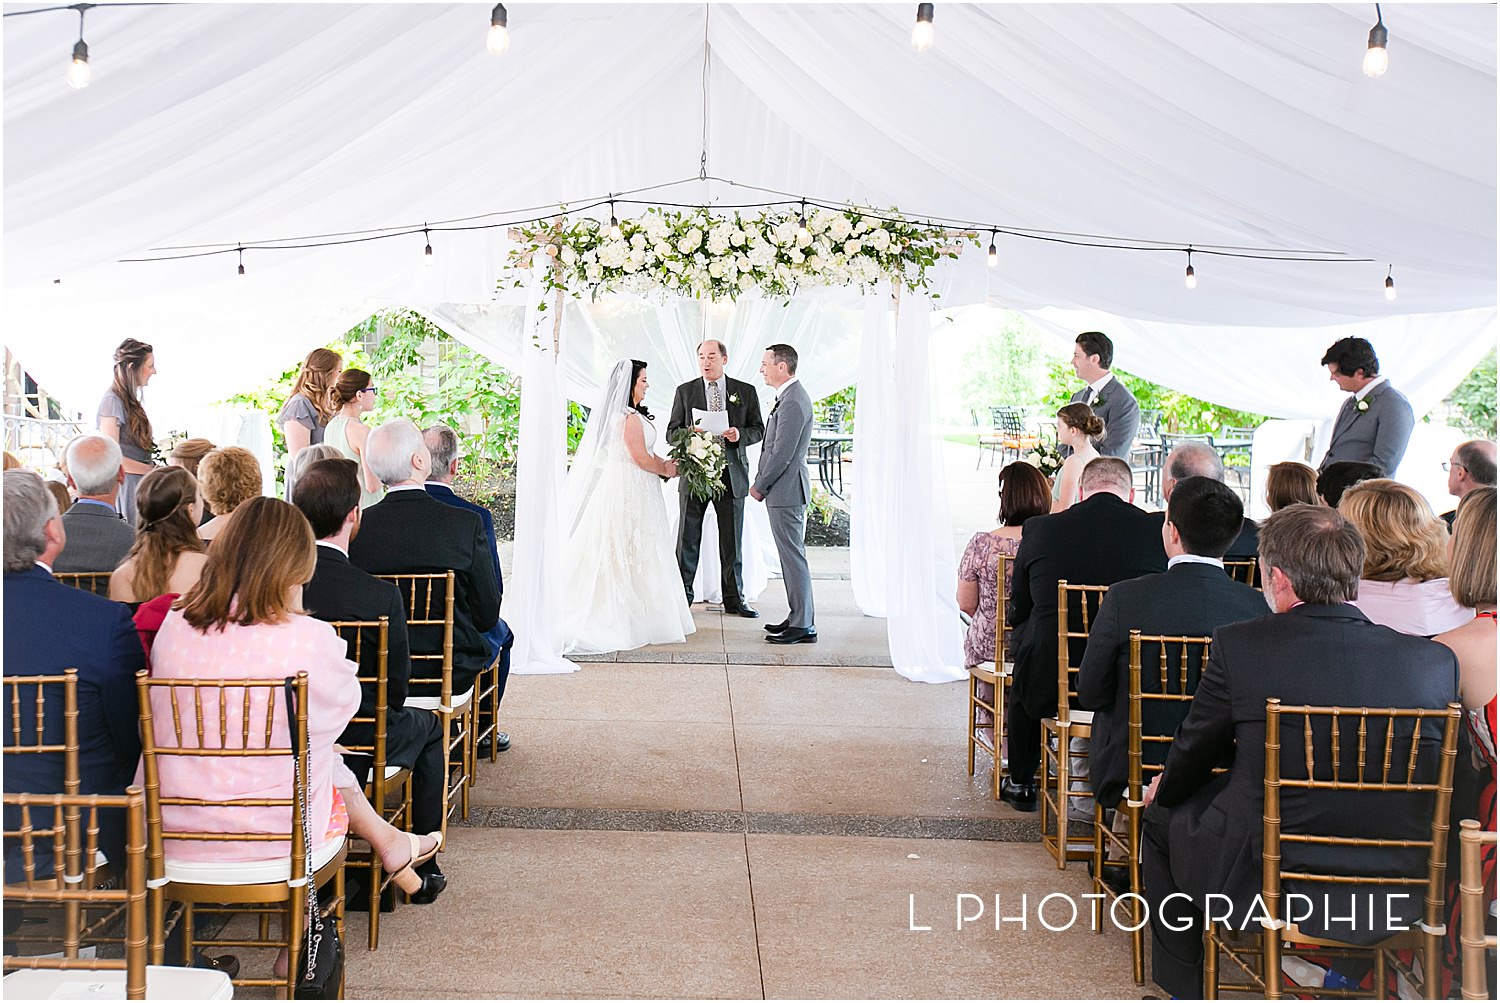 L Photographie St. Louis wedding photography Westwood Country Club Cosmopolitan Events_0018.jpg